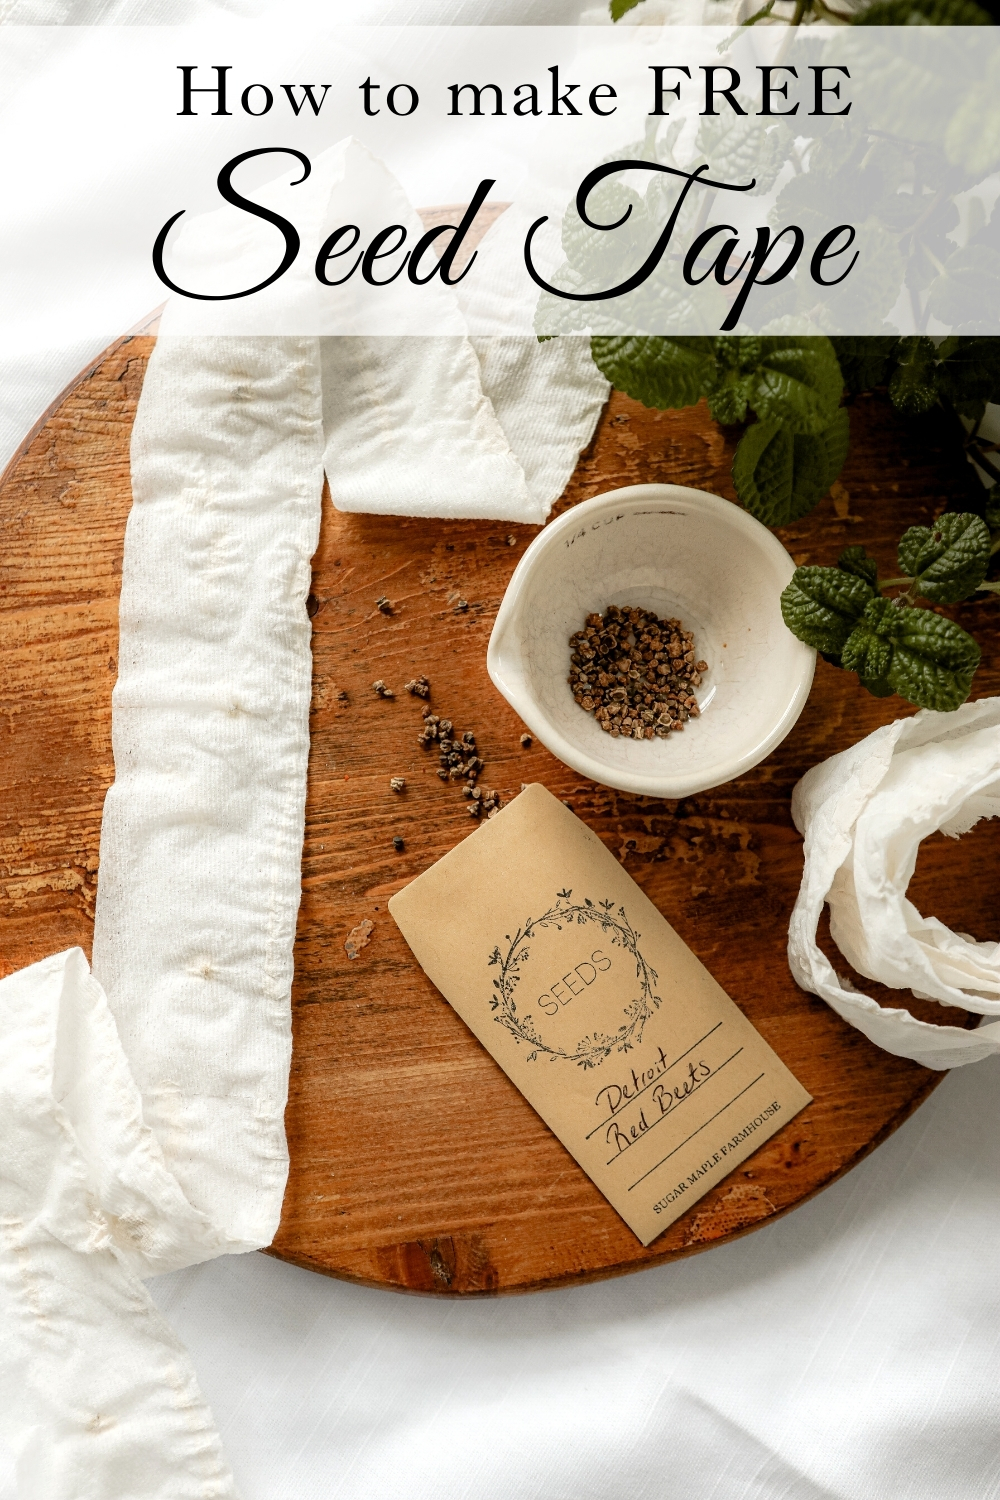 Seed Tape DIY from toilet paper